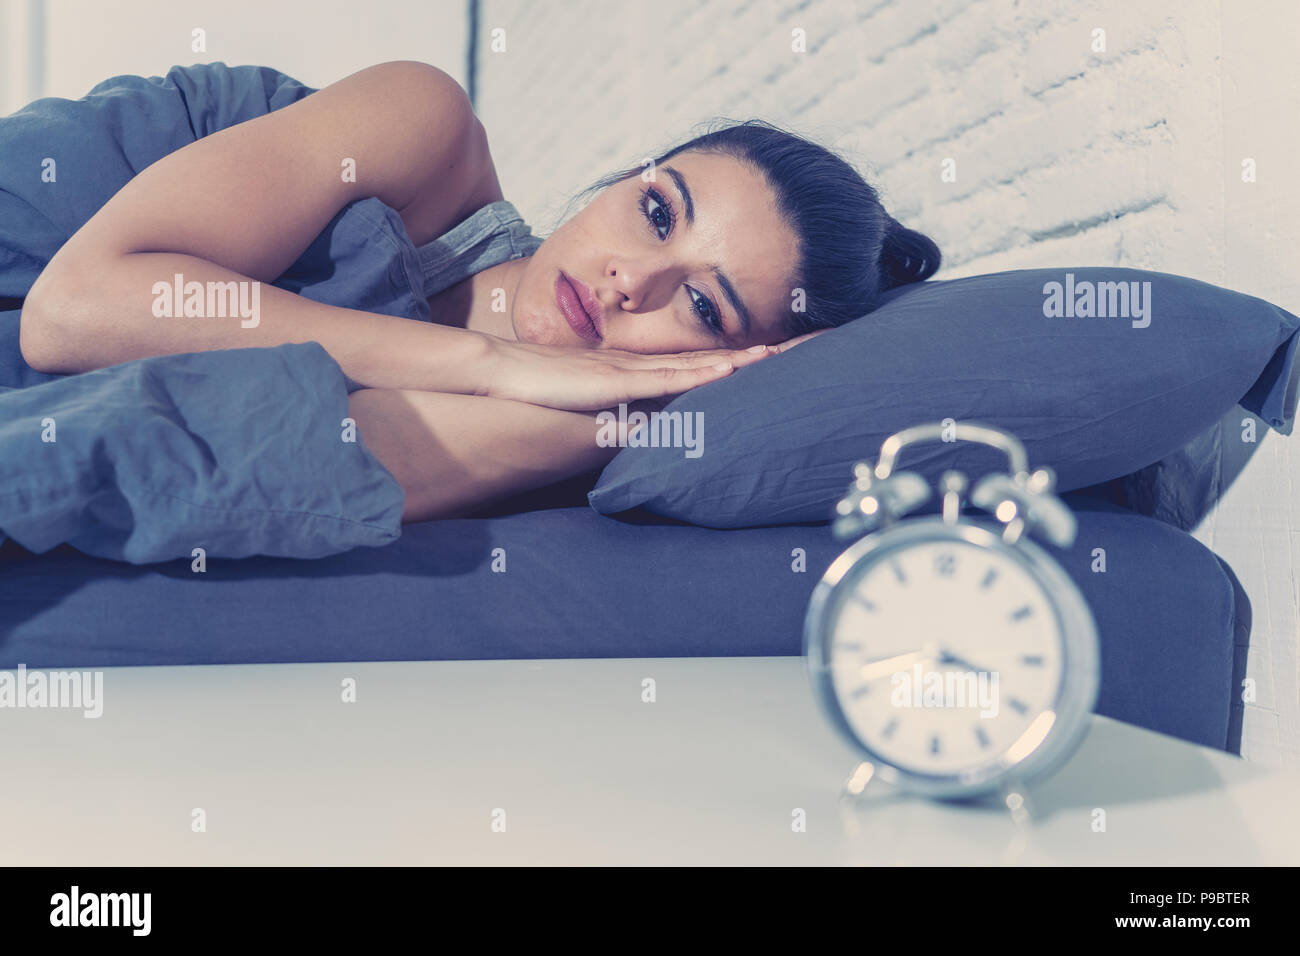 young beautiful hispanic woman at home bedroom lying in bed late at night trying to sleep suffering insomnia sleeping disorder or scared on nightmares Stock Photo